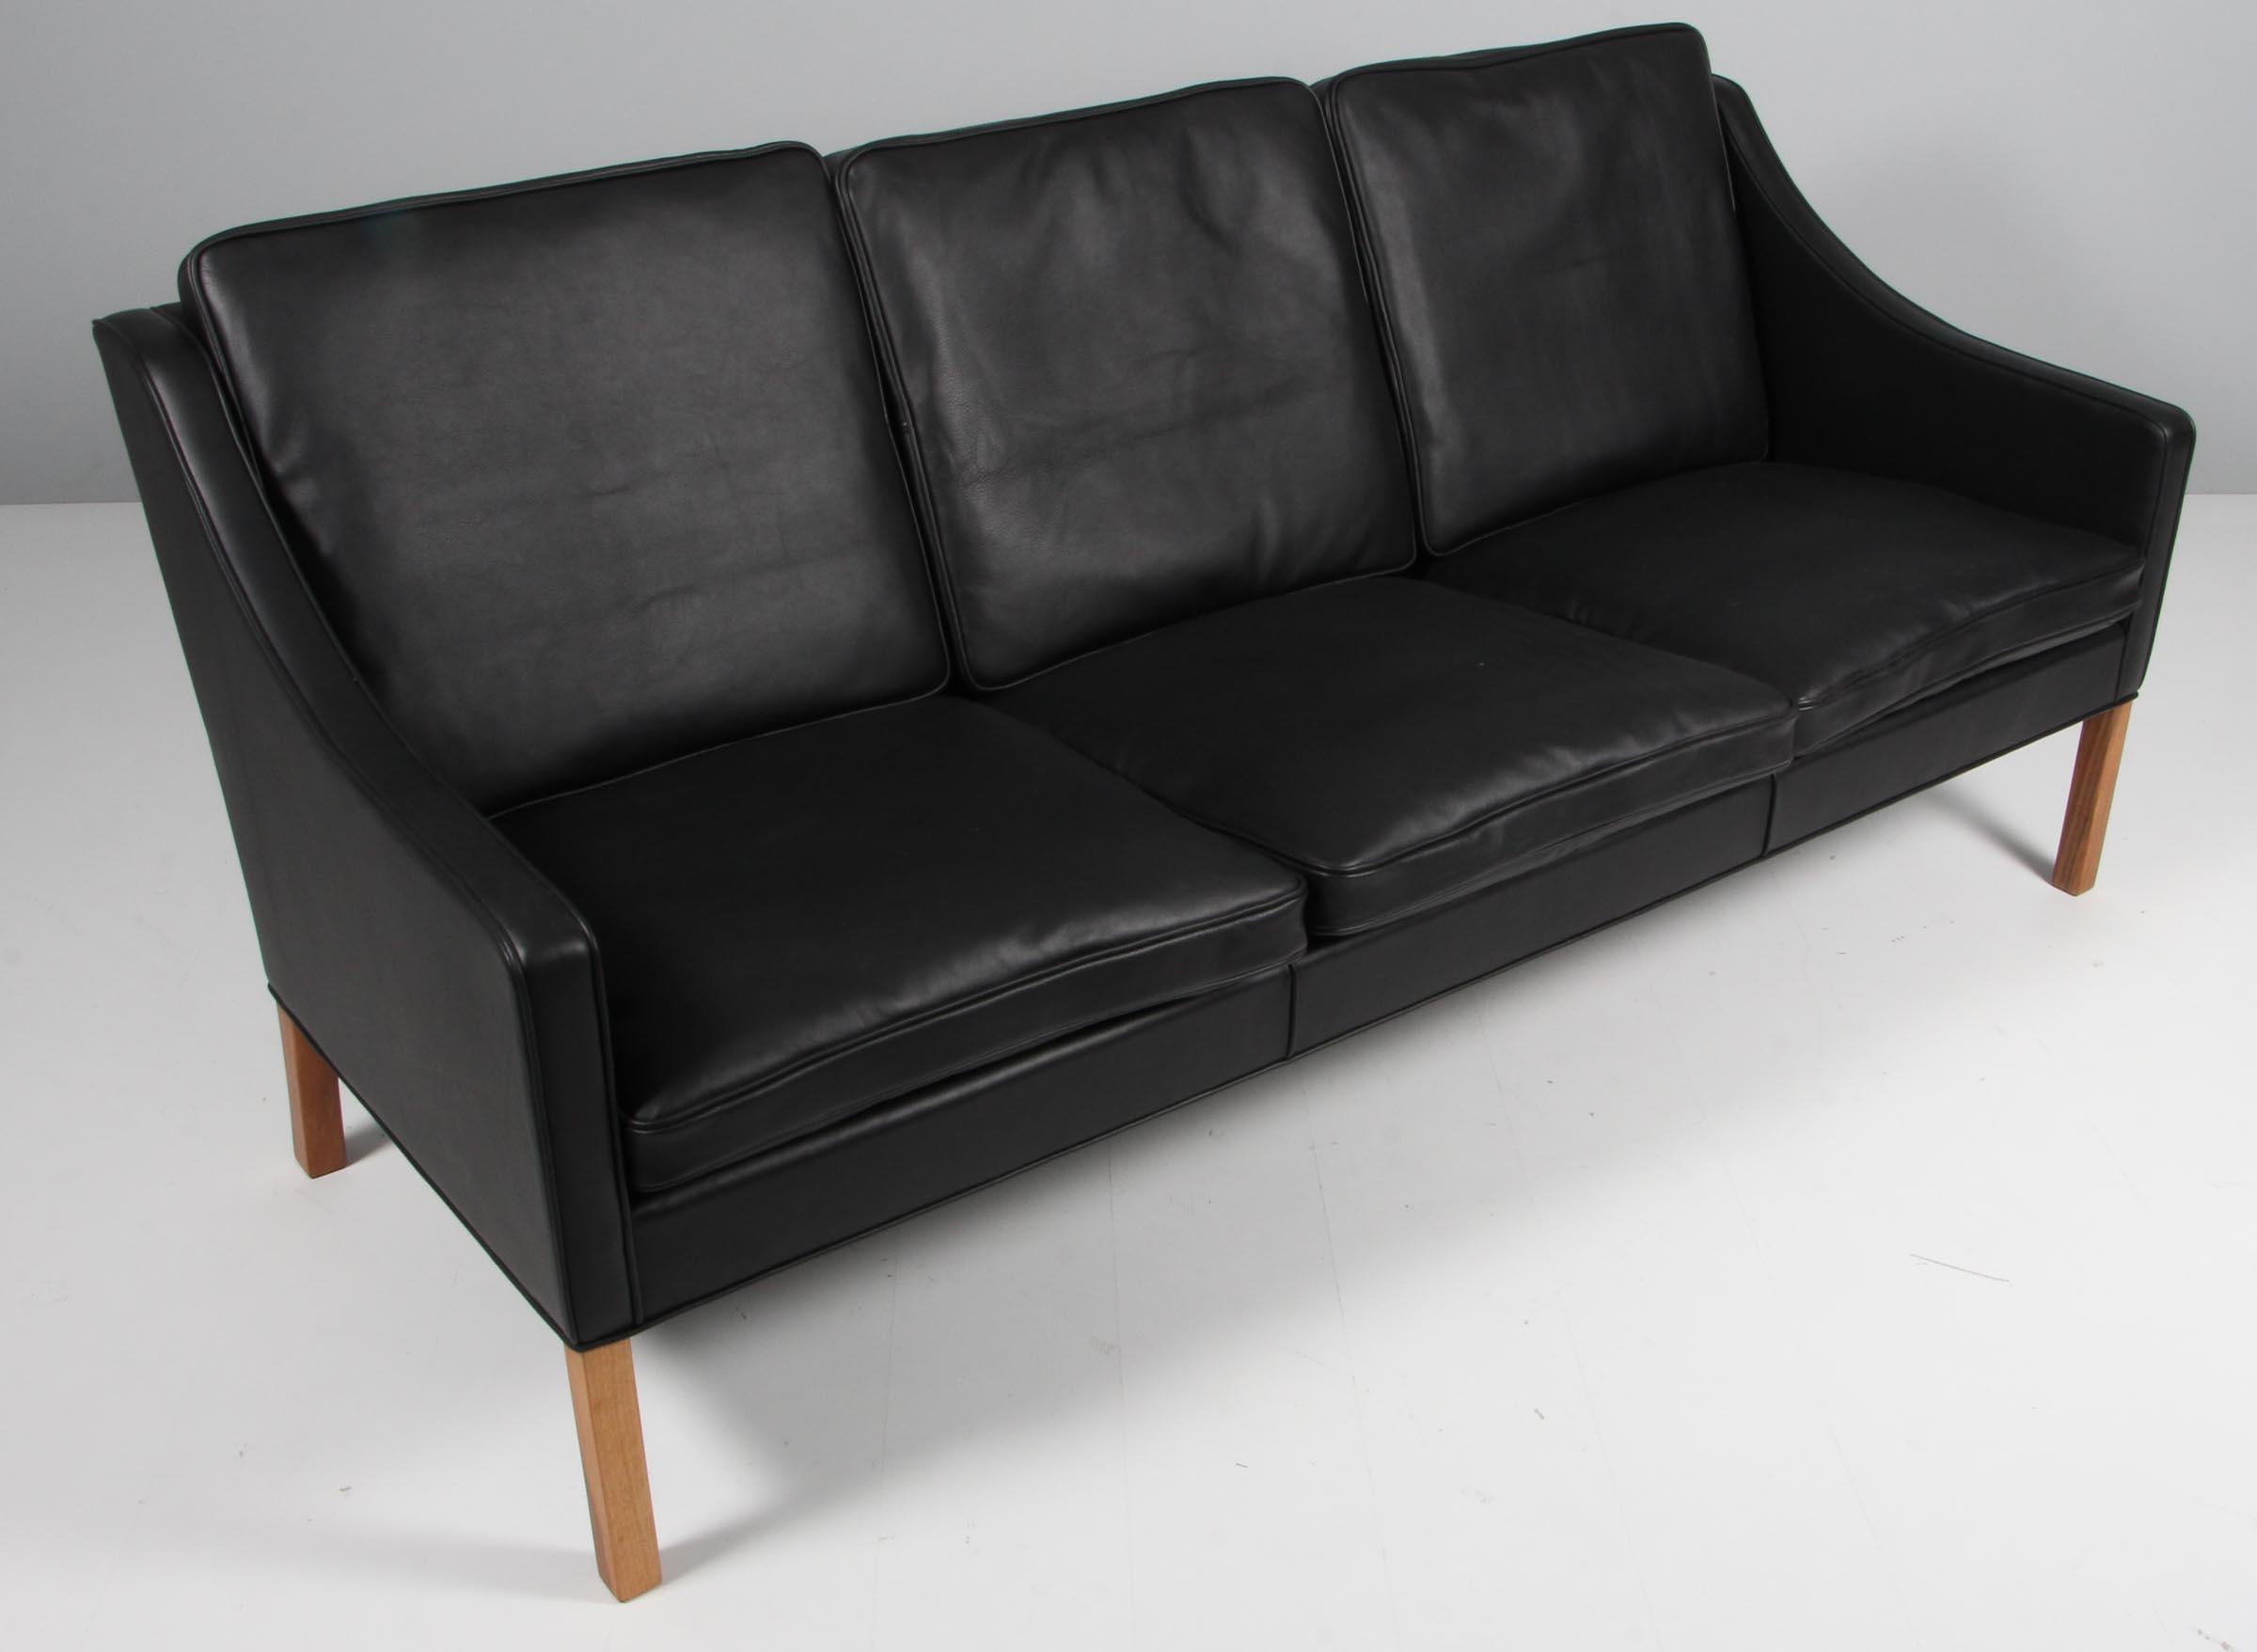 Børge Mogensen three-seat sofa new upholstery with black elegance aniline leather.

Legs of teak.

Model 2209, made by Fredericia furniture.